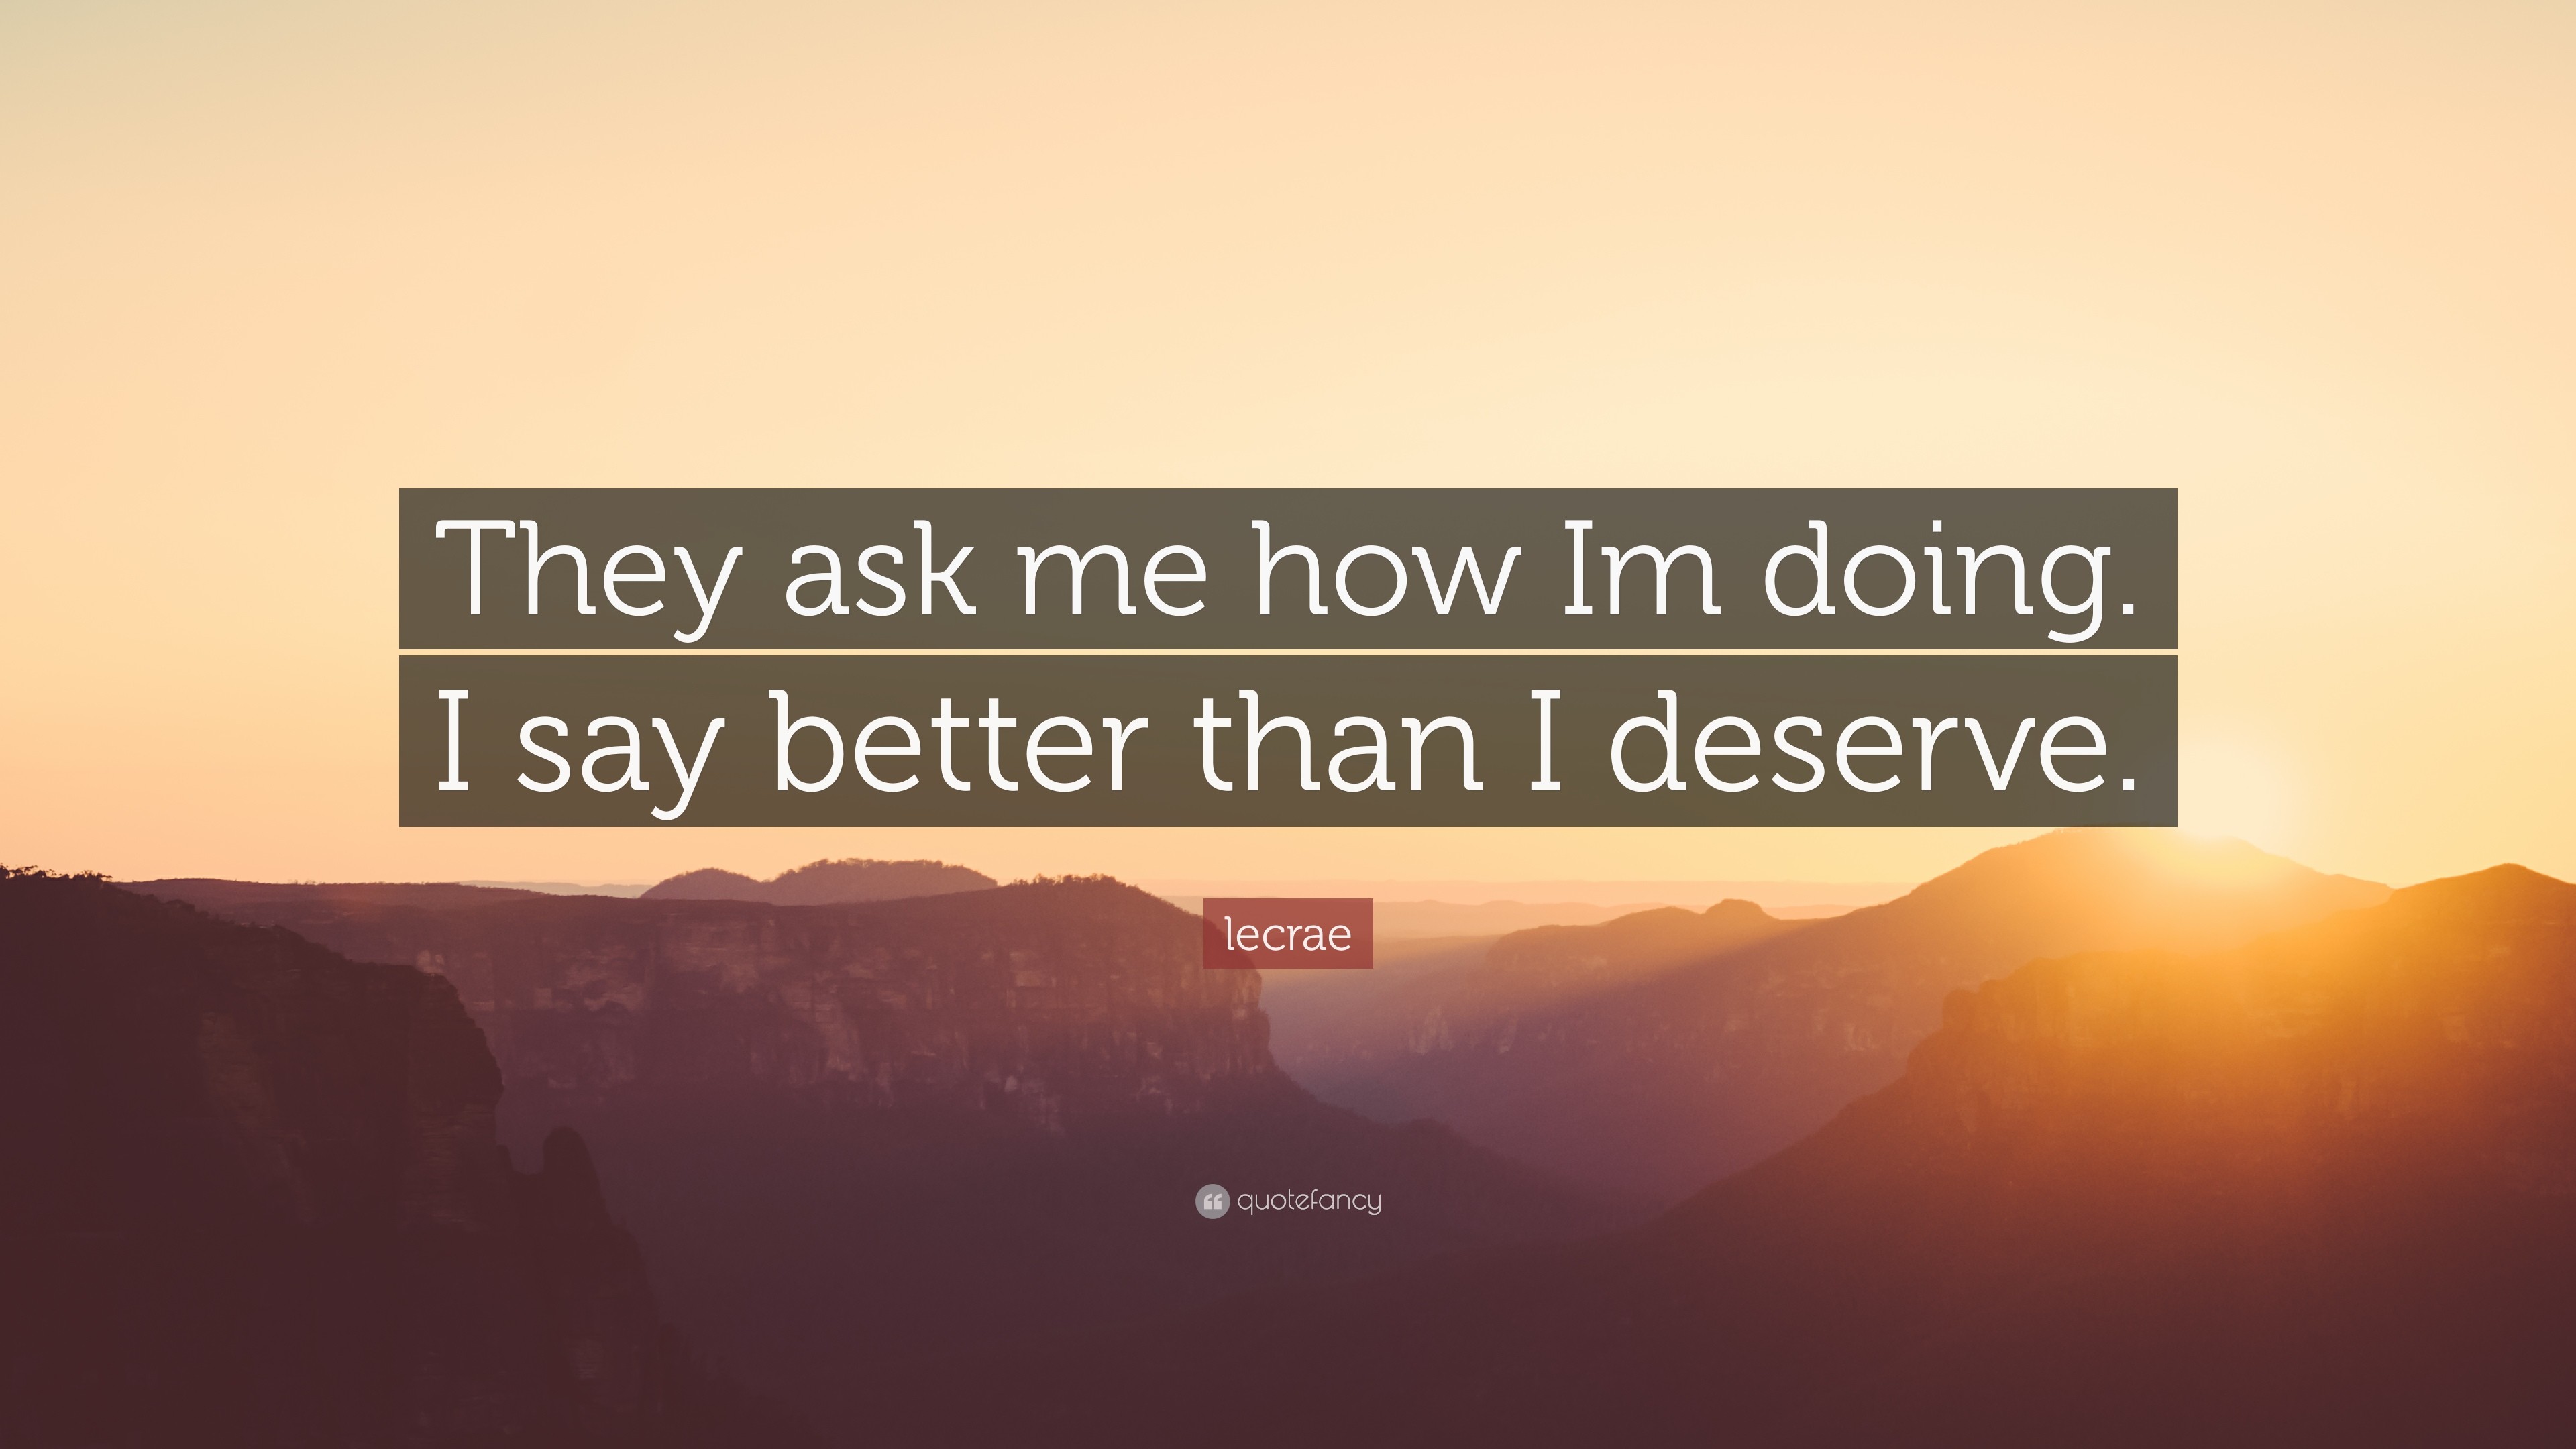 3840x2160 Lecrae Quote: “They ask me how Im doing. I say better than I